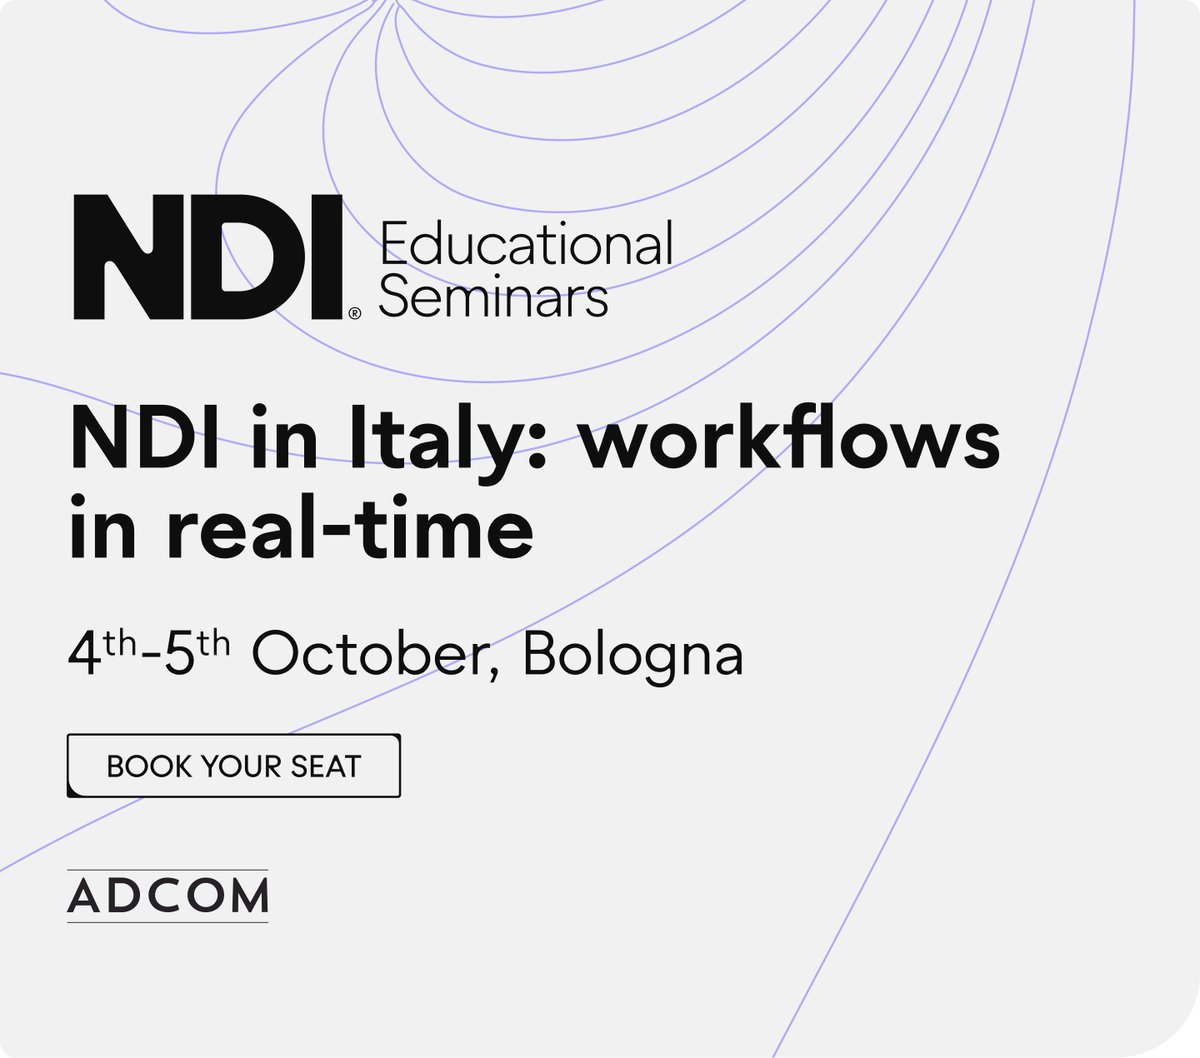 Register for our next educational seminar - NDI in Real-Time, our first seminar fully in Italian.

🗓️ 4th-5th October
📍  Bologna

Register here: ndi.video/events/ndi-in-…

#NDI #EducationalSeminar